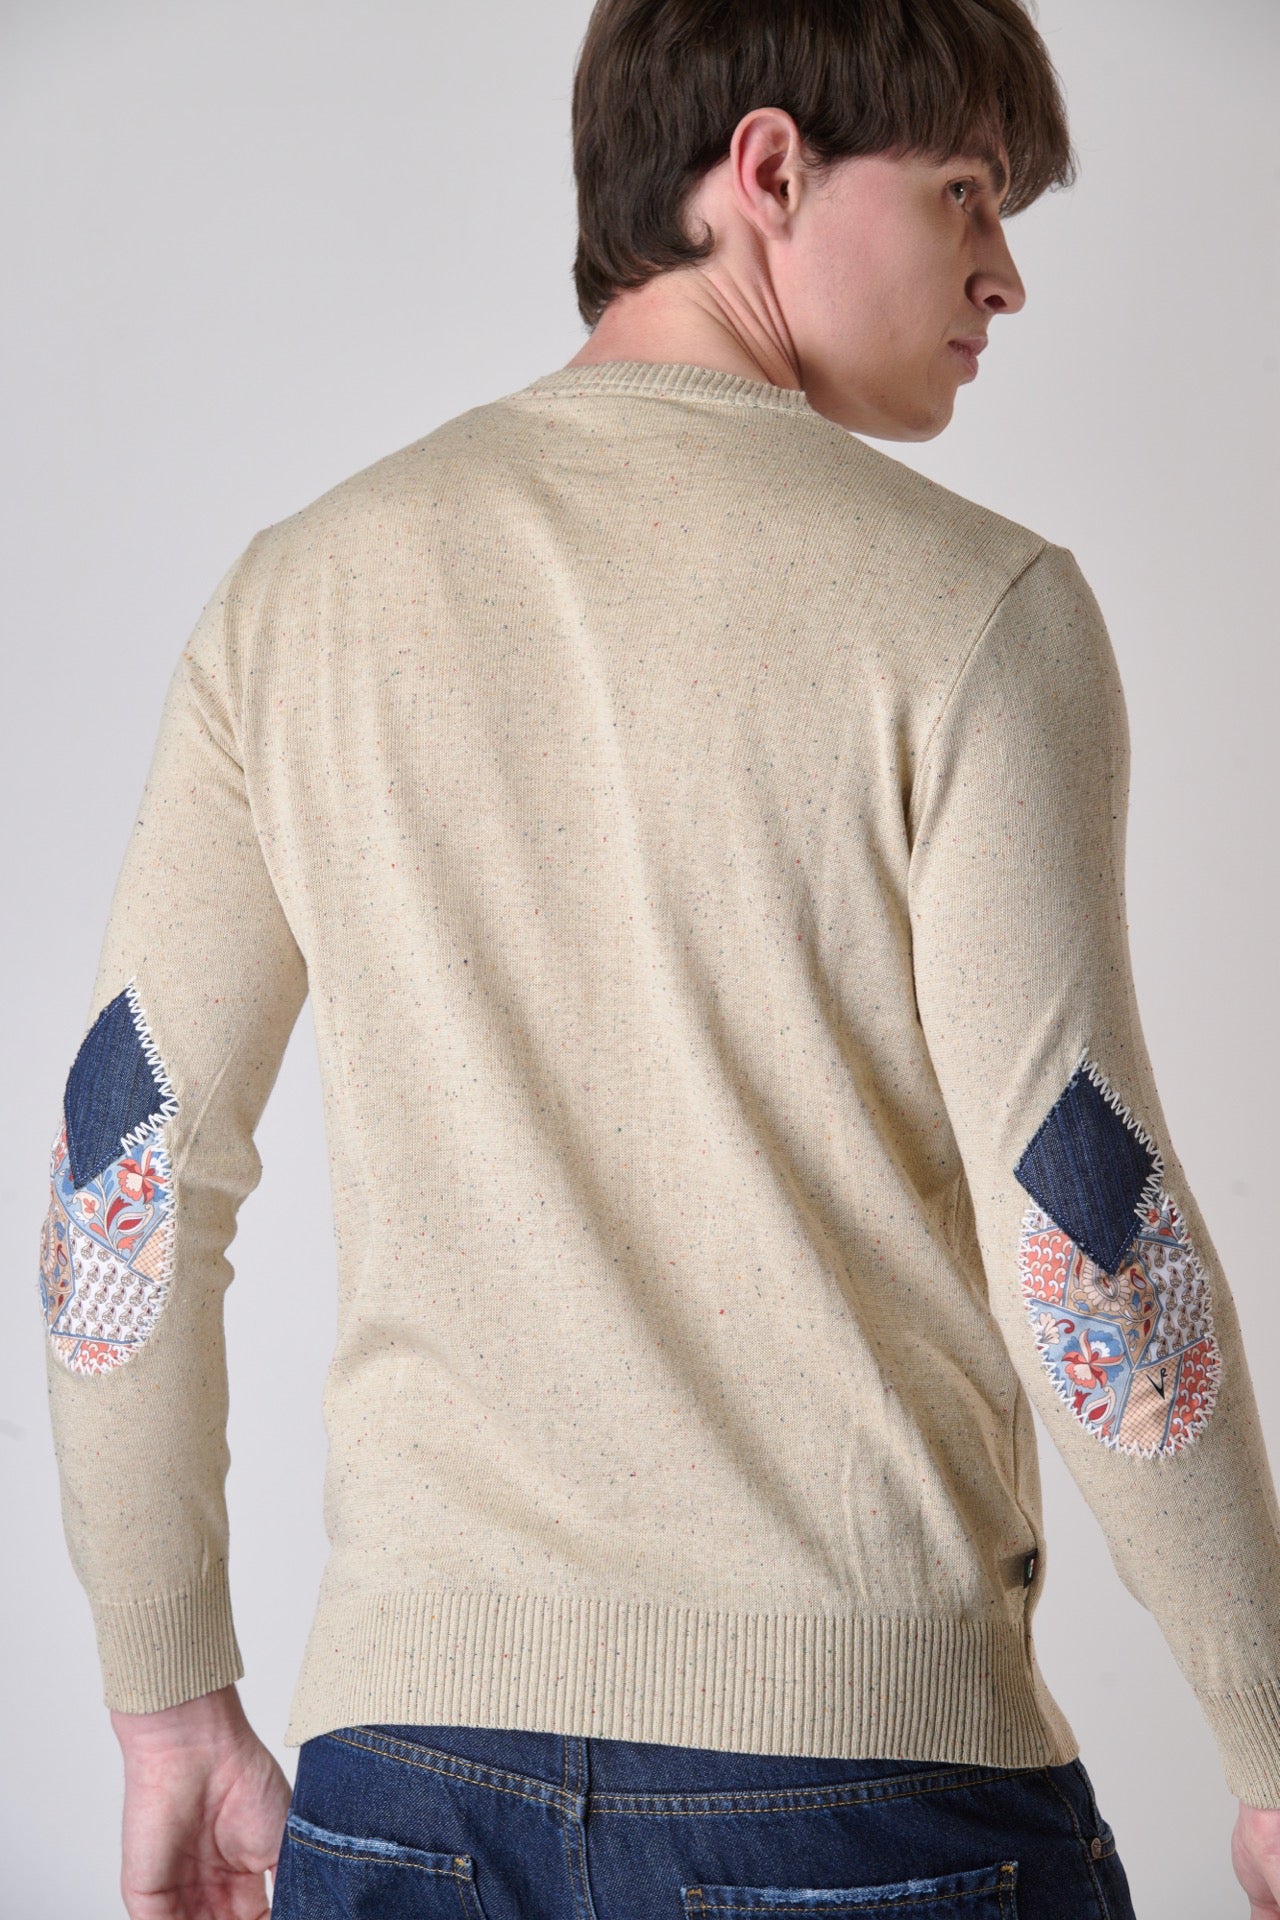 Sand Tweed sweater with embroidered patches in V2 fabric